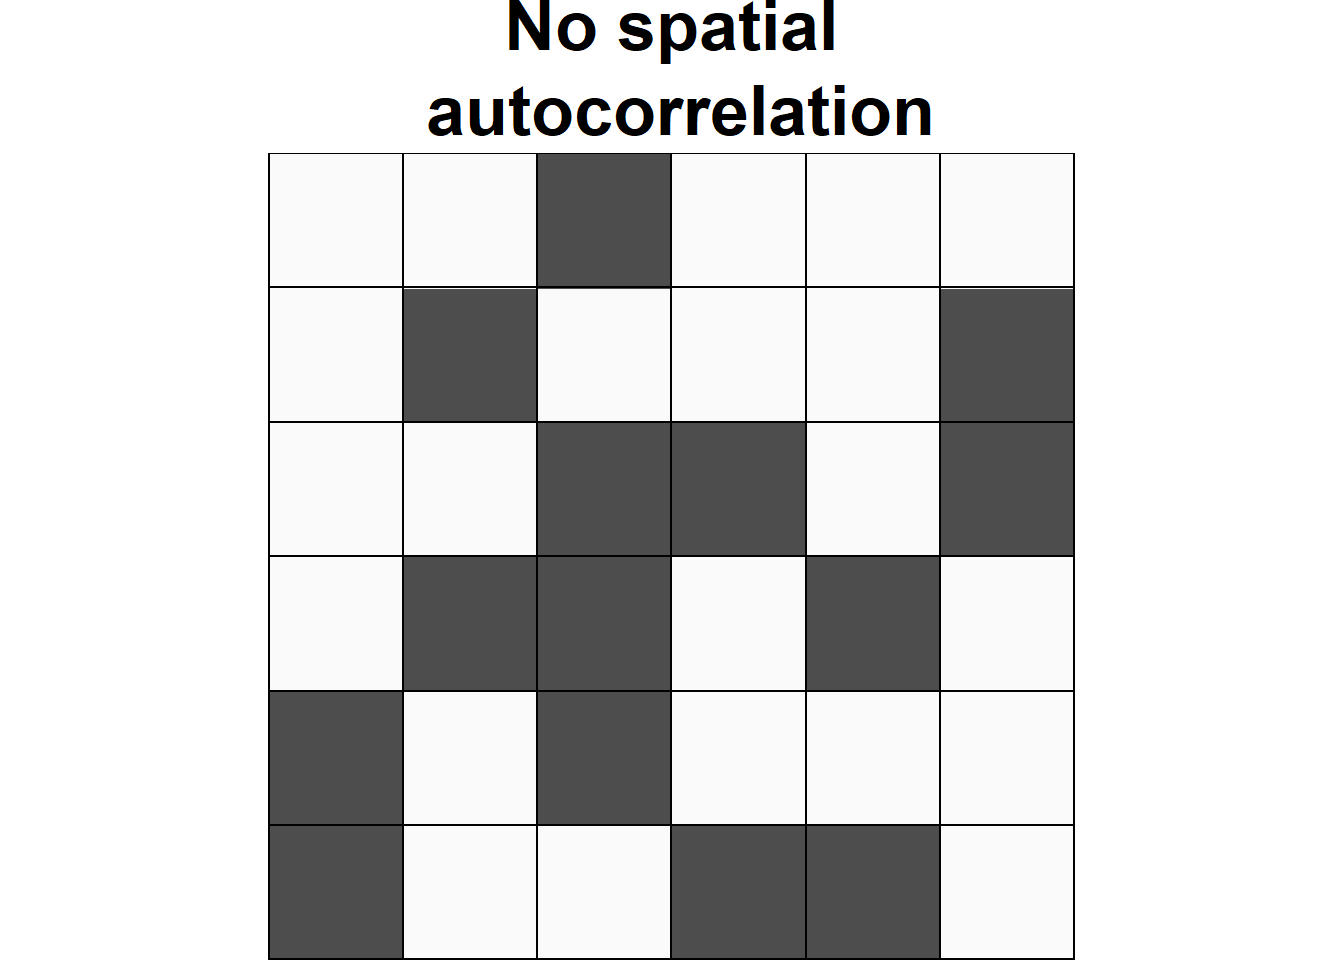 Examples of configurations of areas showing different types of spatial autocorrelation.